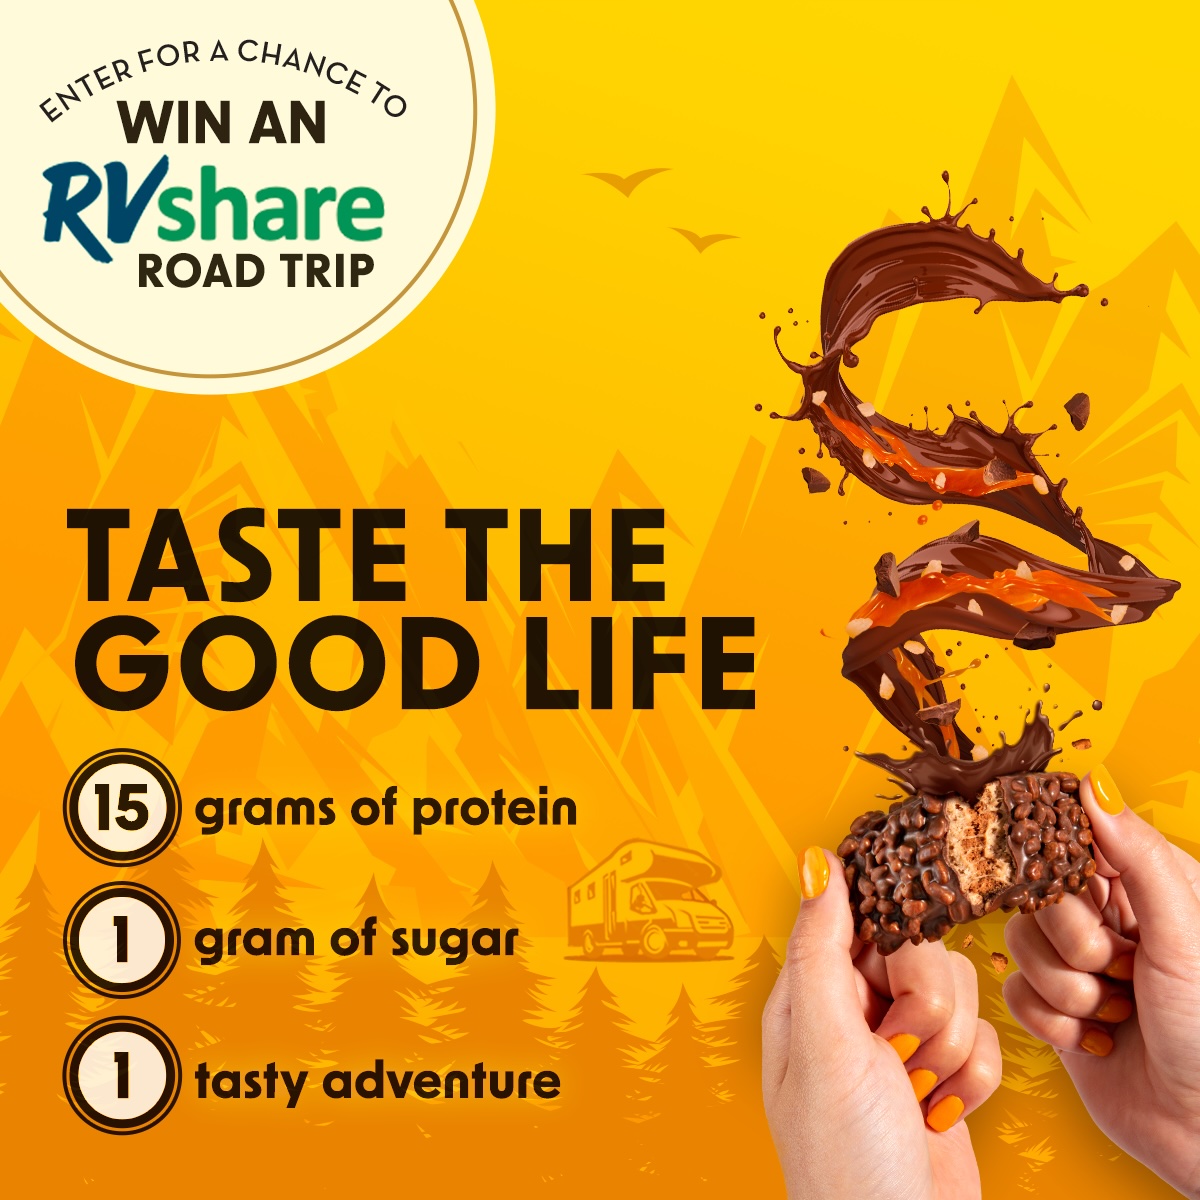 Enter for a chance to win an RVshare Road Trip. Taste the Good Life. 15 grams of protein, 1 gram of sugar, 1 tasty adventure